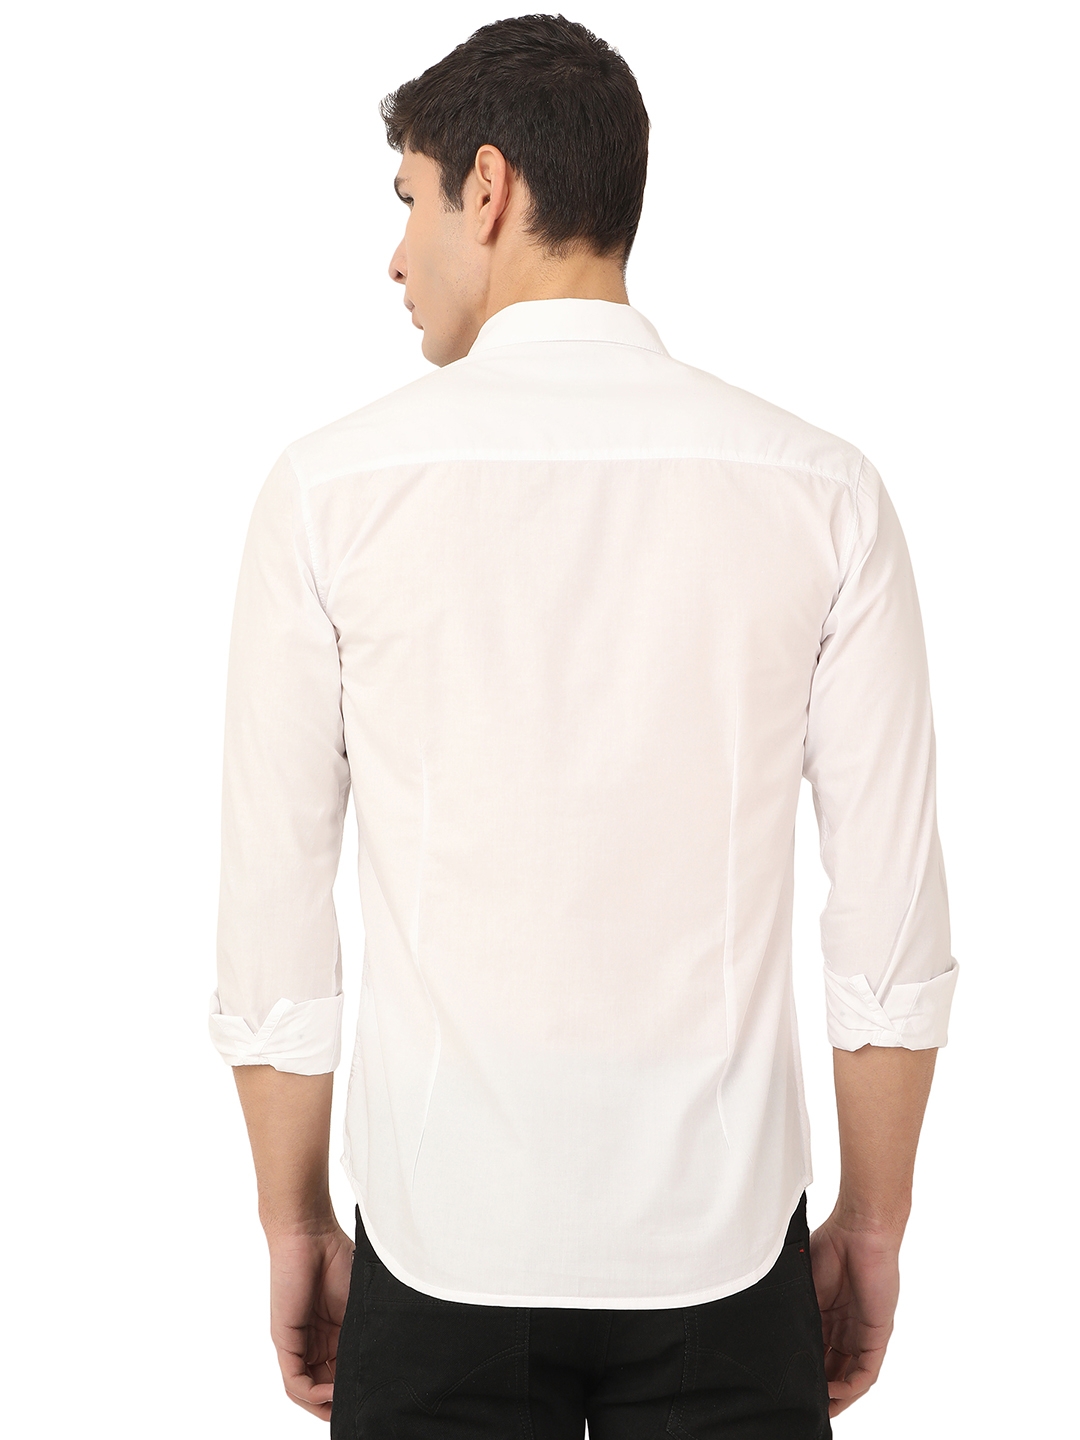 Greenfibre | Bright White Solid Slim Fit Semi Casual Shirt | Greenfibre 2